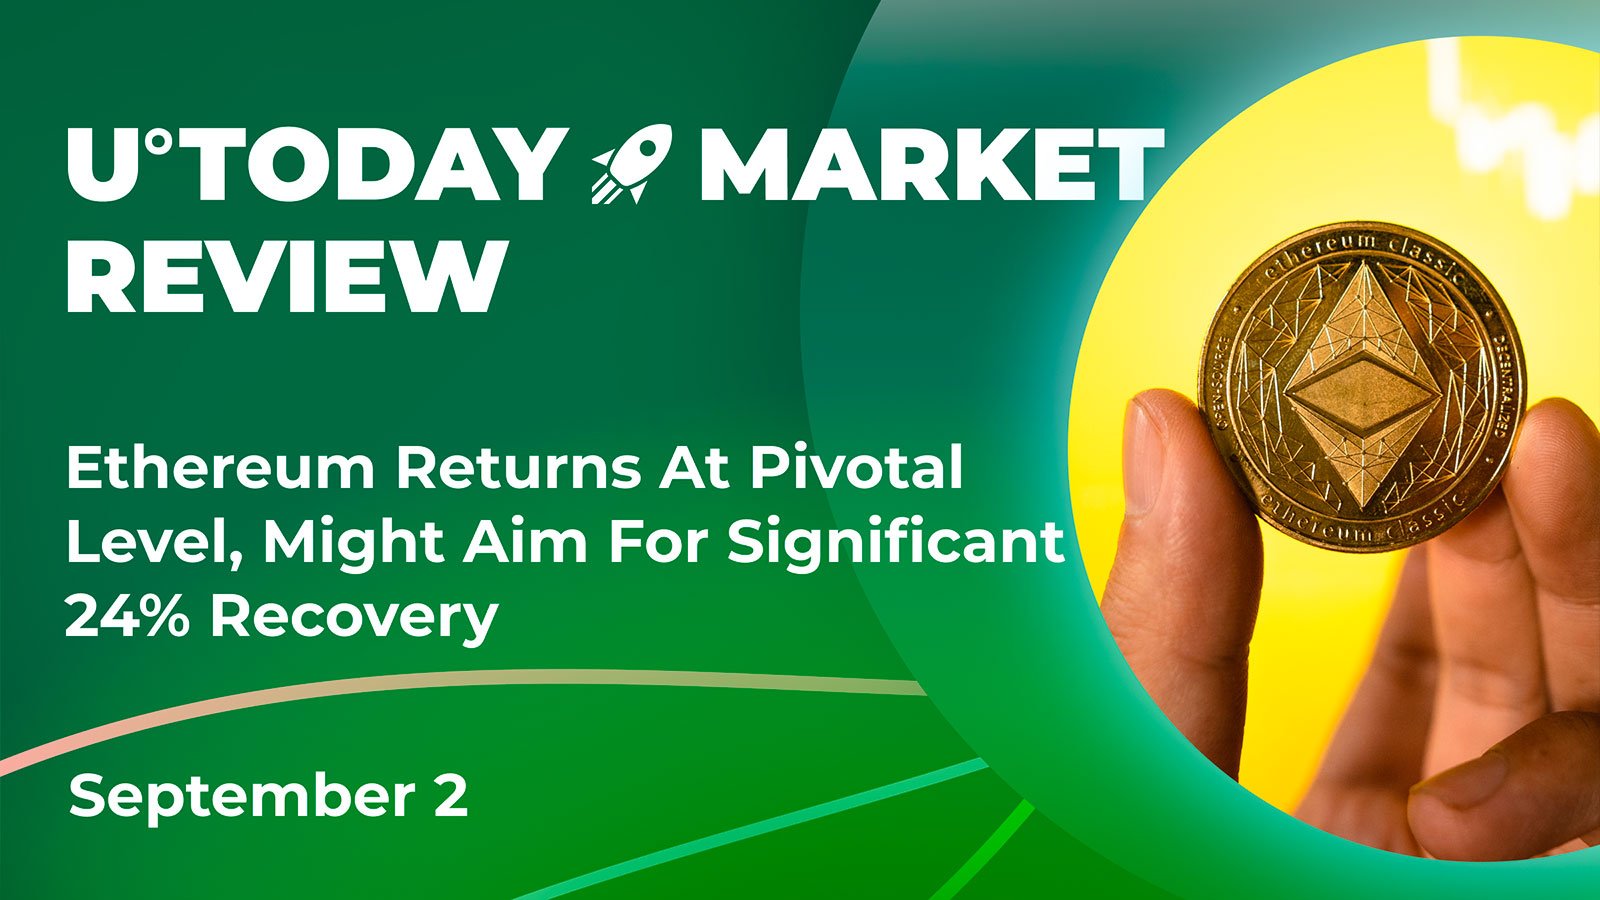 Ethereum Returns At Pivotal Level, Might Aim For Significant 24% Recovery: Crypto Market Review, September 2